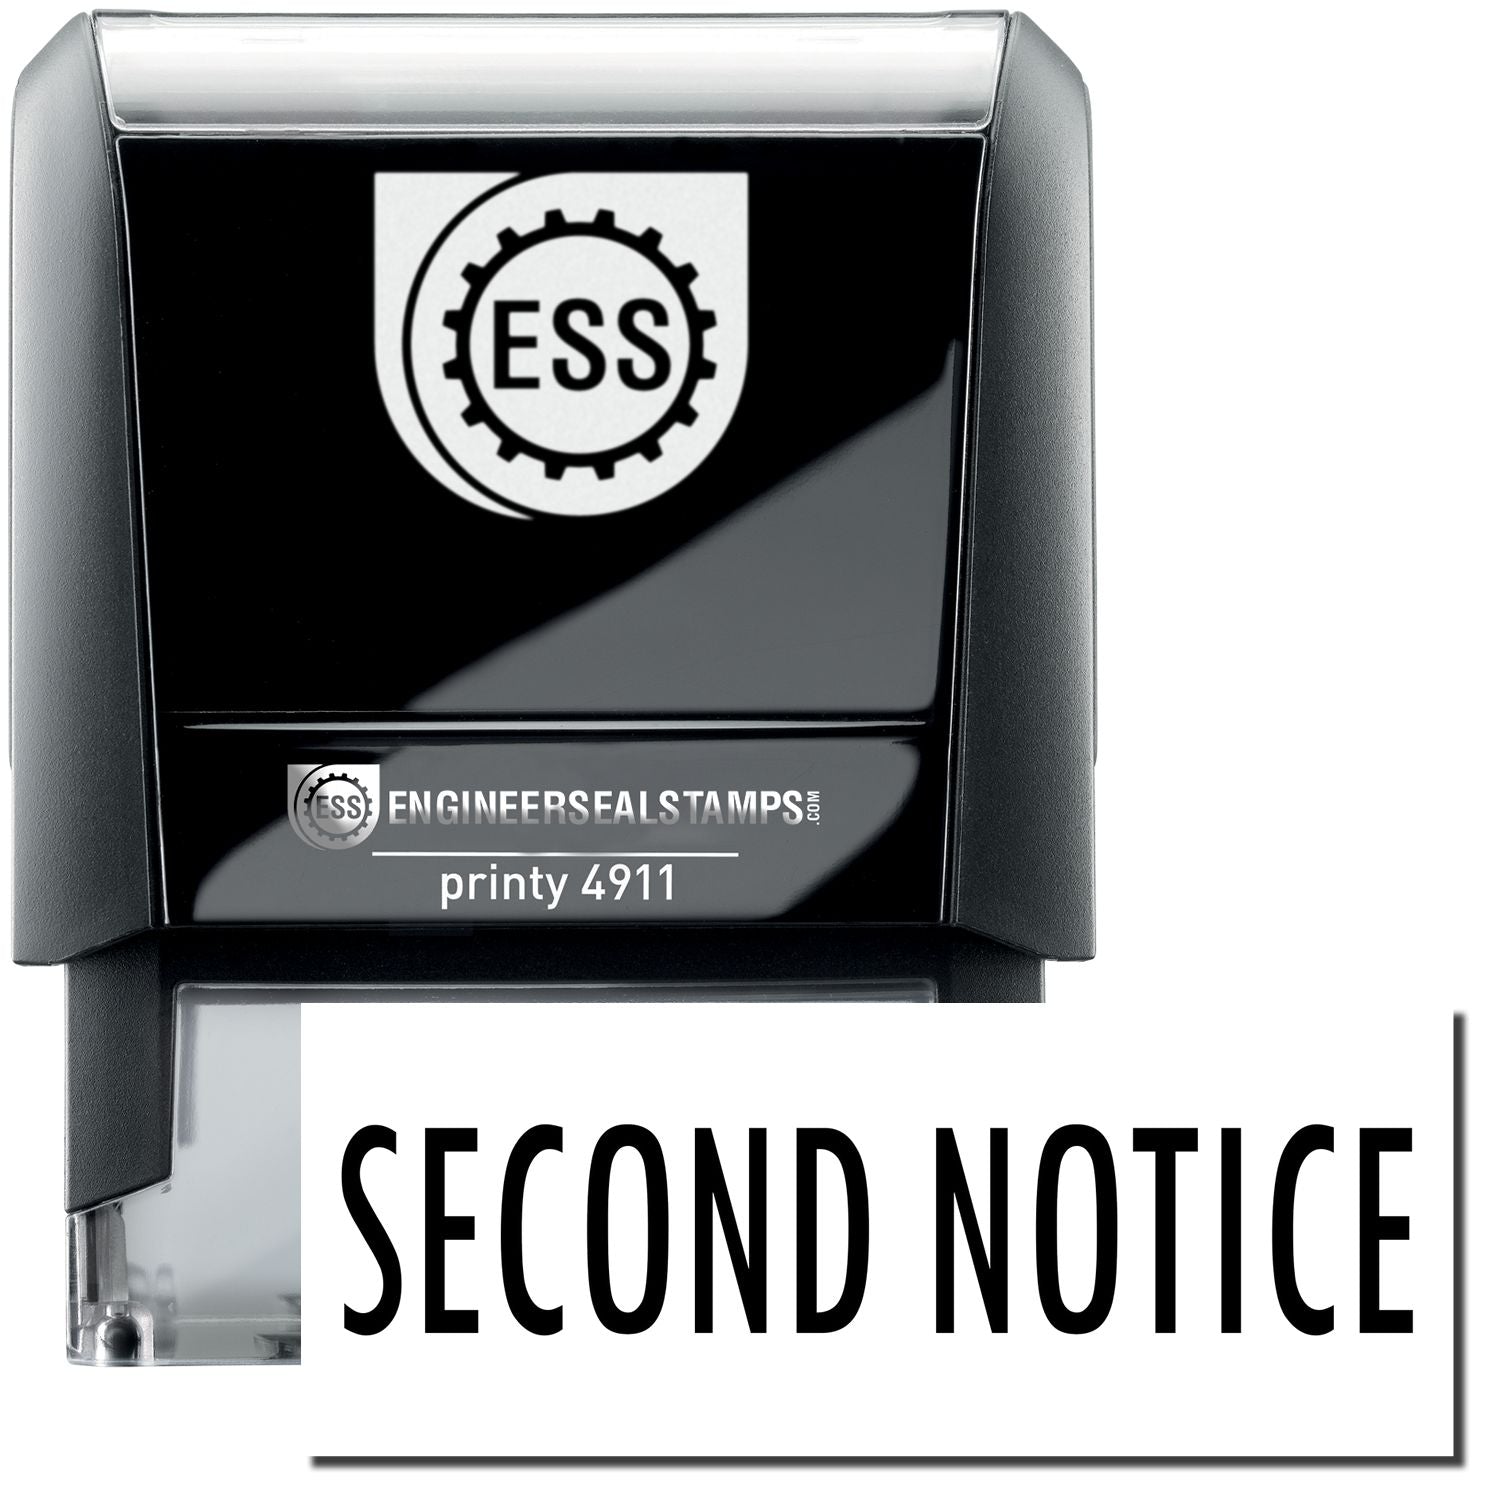 A self-inking stamp with a stamped image showing how the text "SECOND NOTICE" is displayed after stamping.